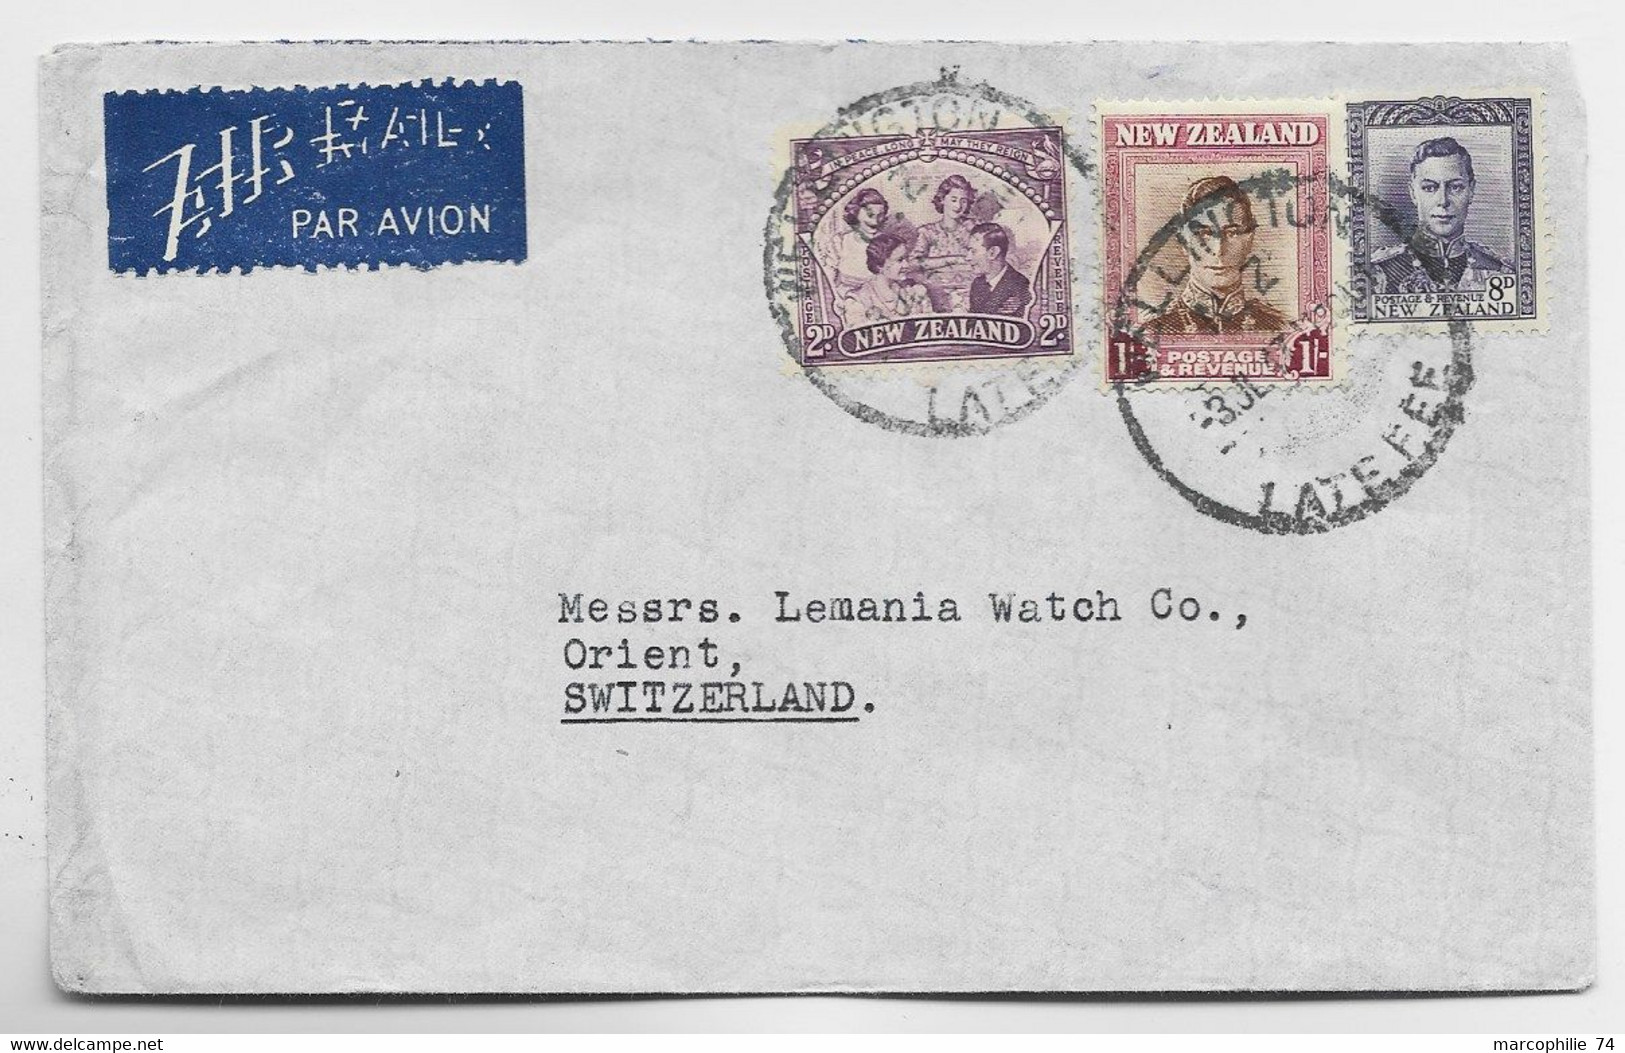 NEW ZEALAND 1+ 8D +2D LETTRE COVER AIR MAIL WELLINGTON 1943 TO SUISSE - Covers & Documents